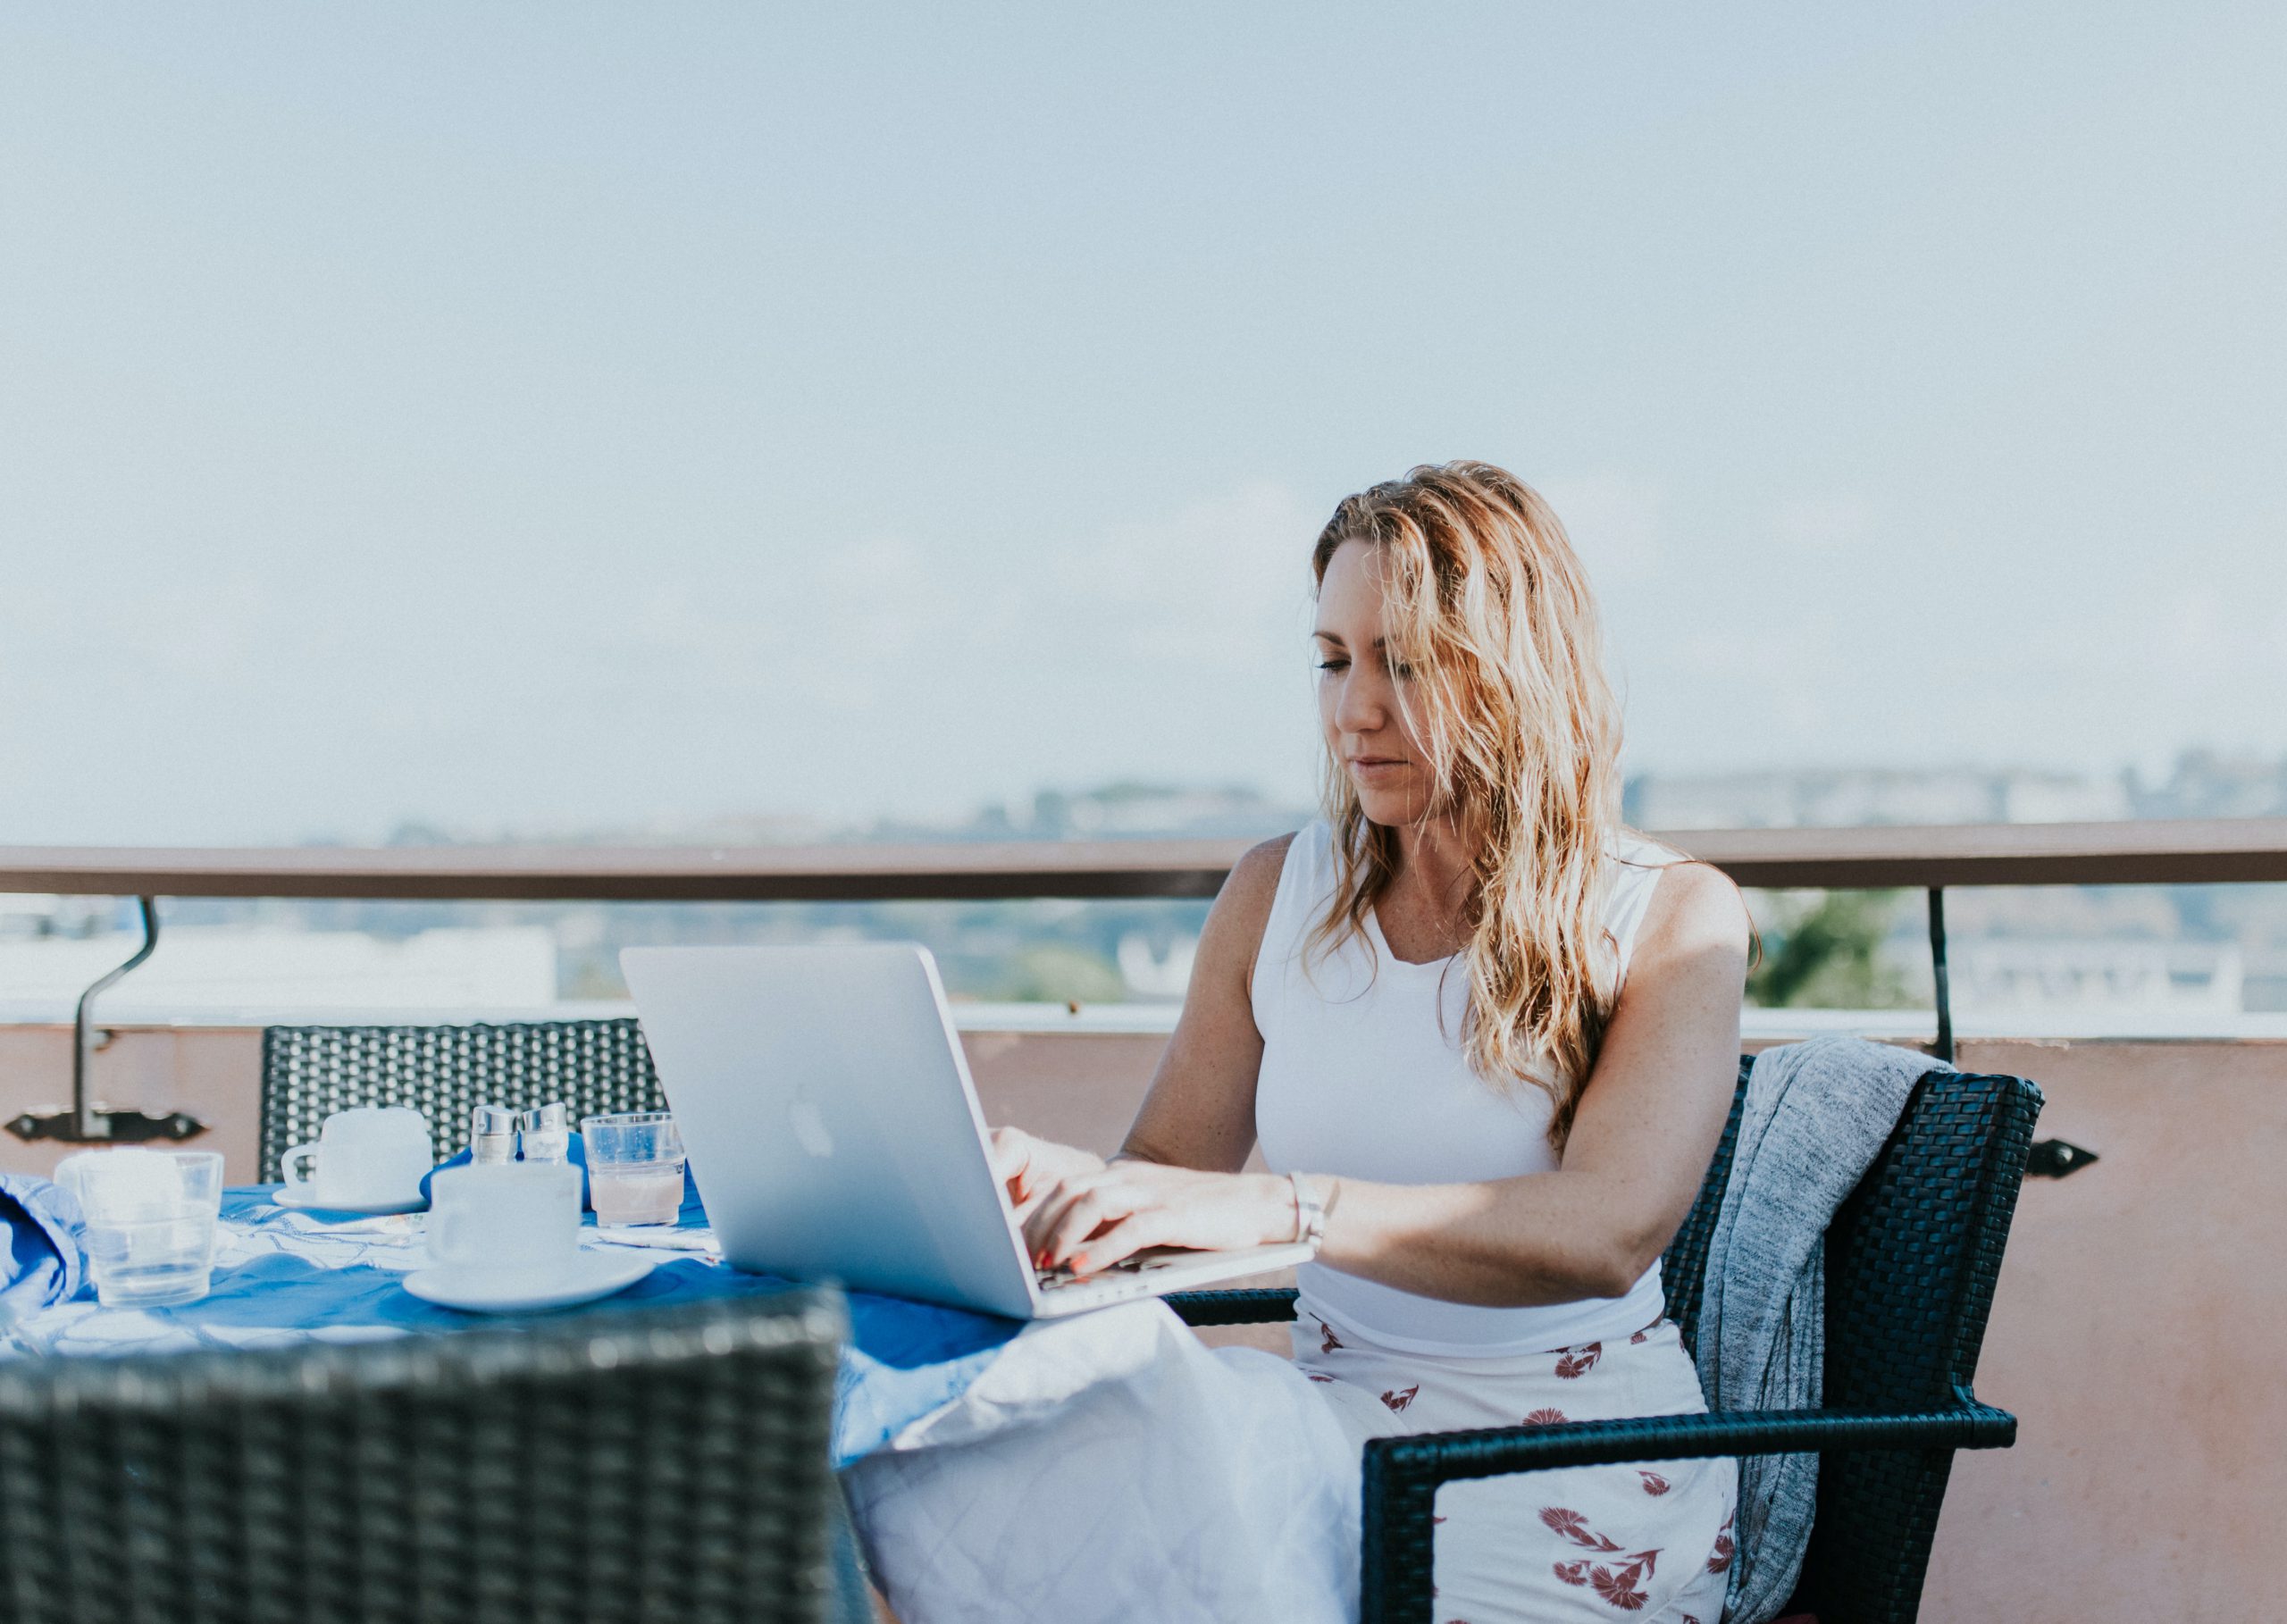 What is a Digital Nomad